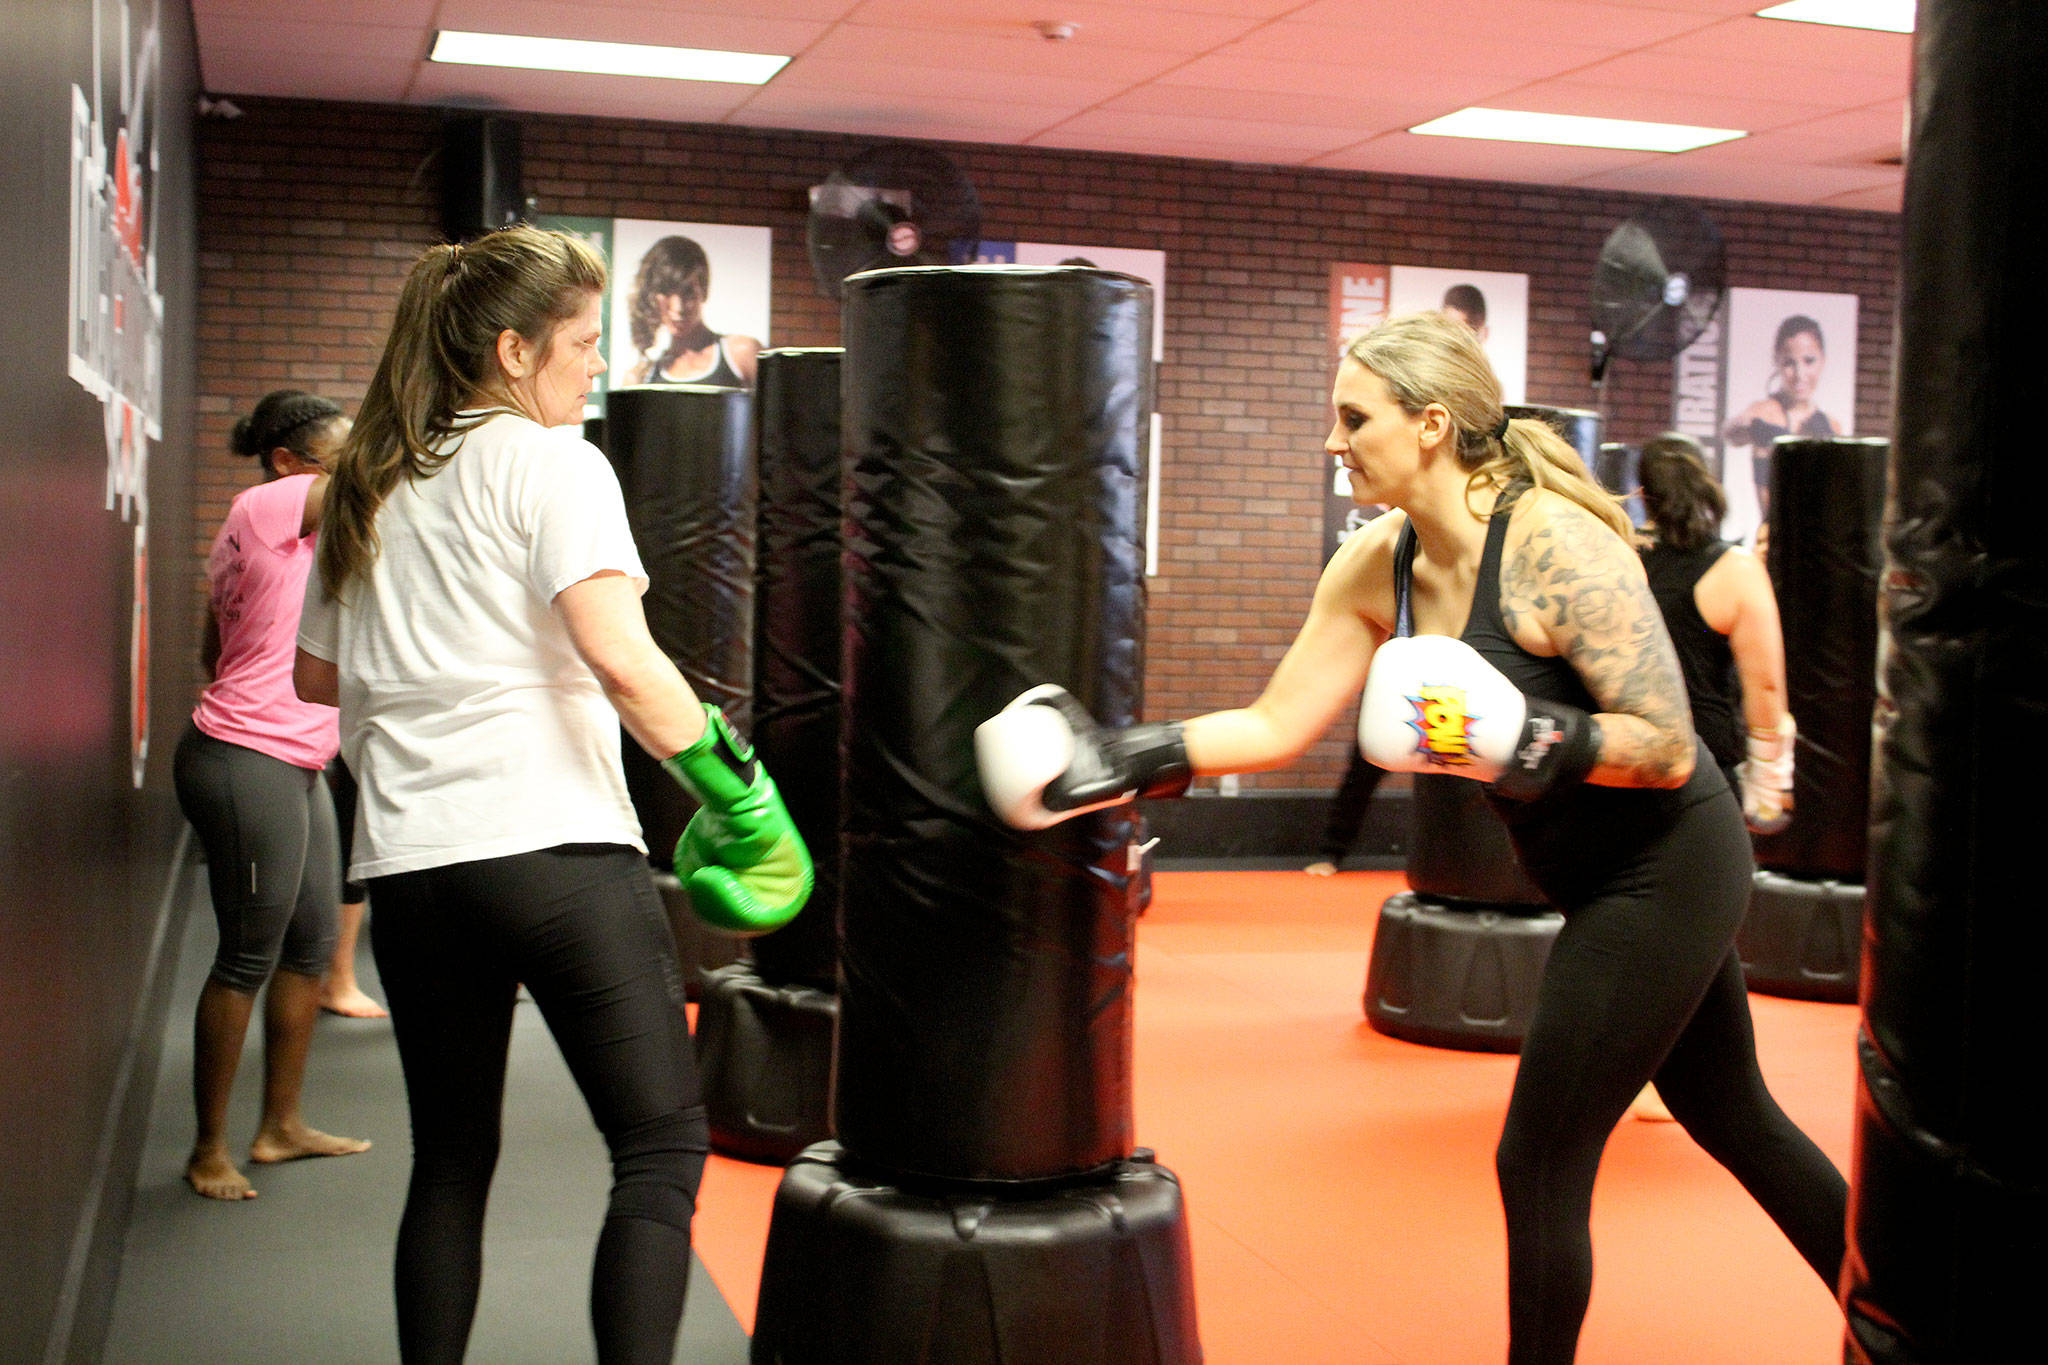 Classes at iLoveKickboxing are high energy, high intensity workouts, which up to about 30 people can participate in at a time. Throughout the classes, instructors go around helping people correct their form and encouraging them to keep pushing.                                Michelle Beahm / Kitsap News Group